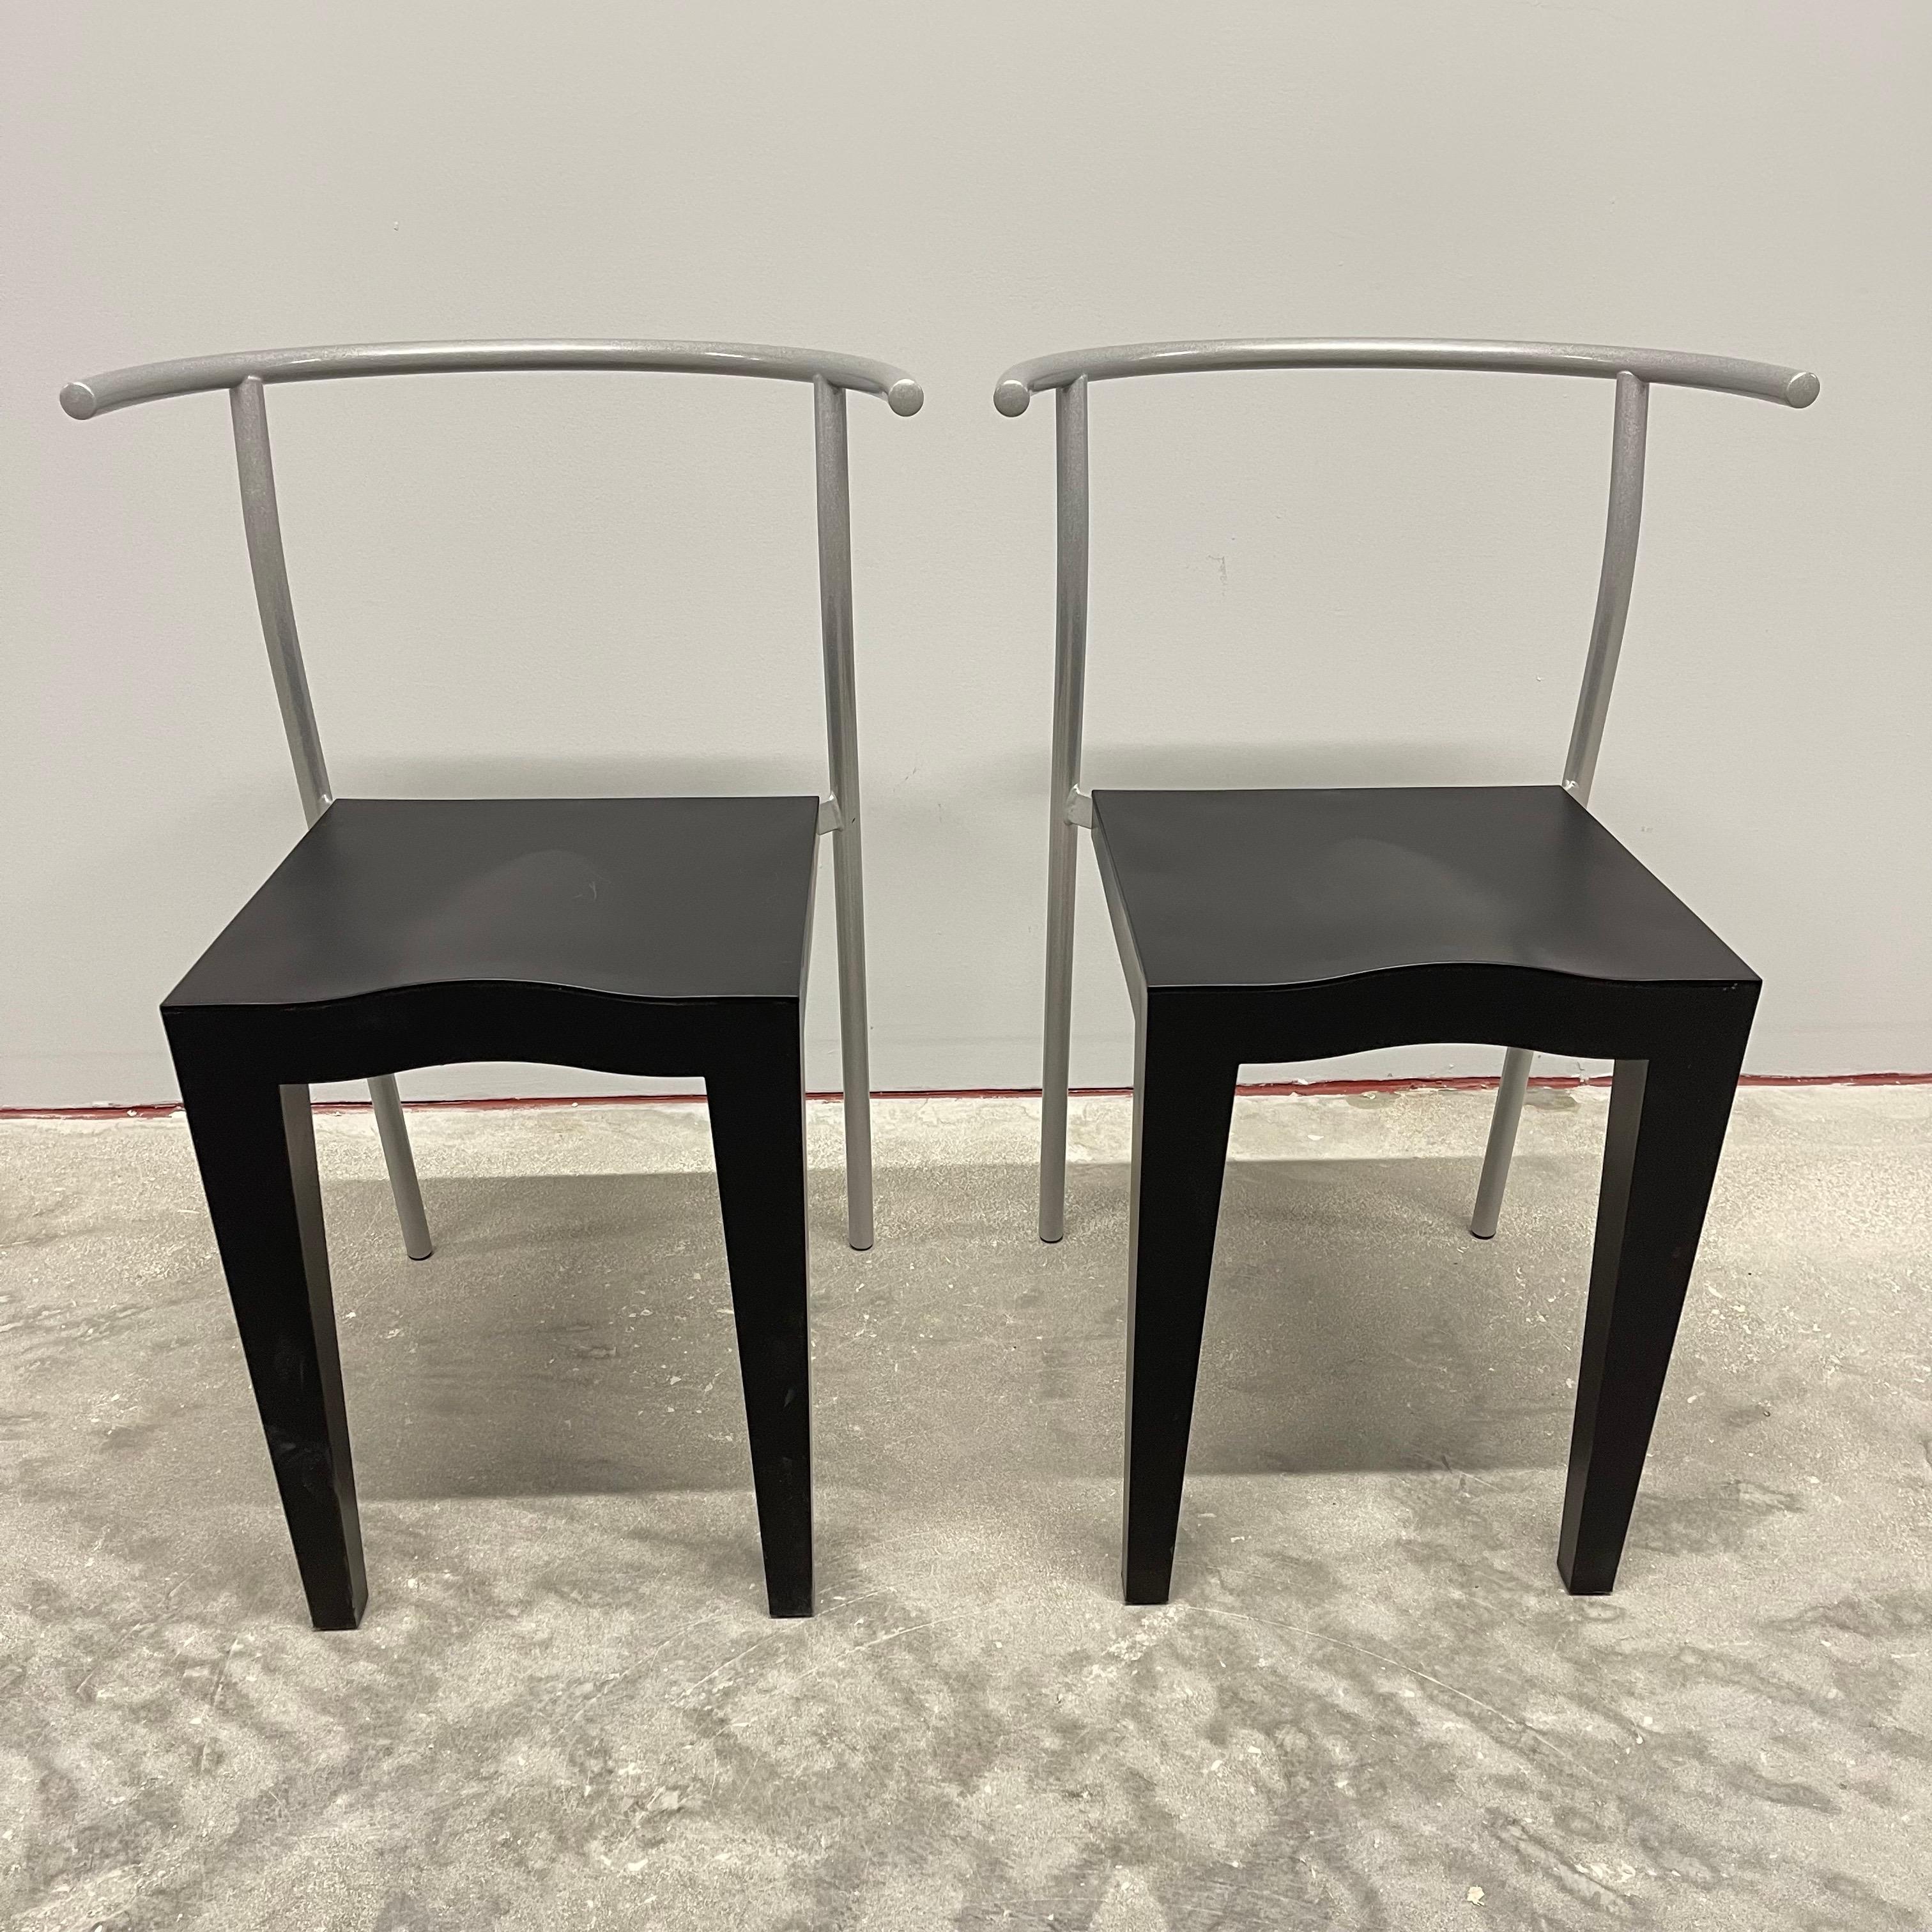 Pair of iconic Dr Glob chairs. Post modern design rendered in black molded propylene with a grey powder coated steel frame back and legs. Designed by Philippe Starck for Kartell, 1990.